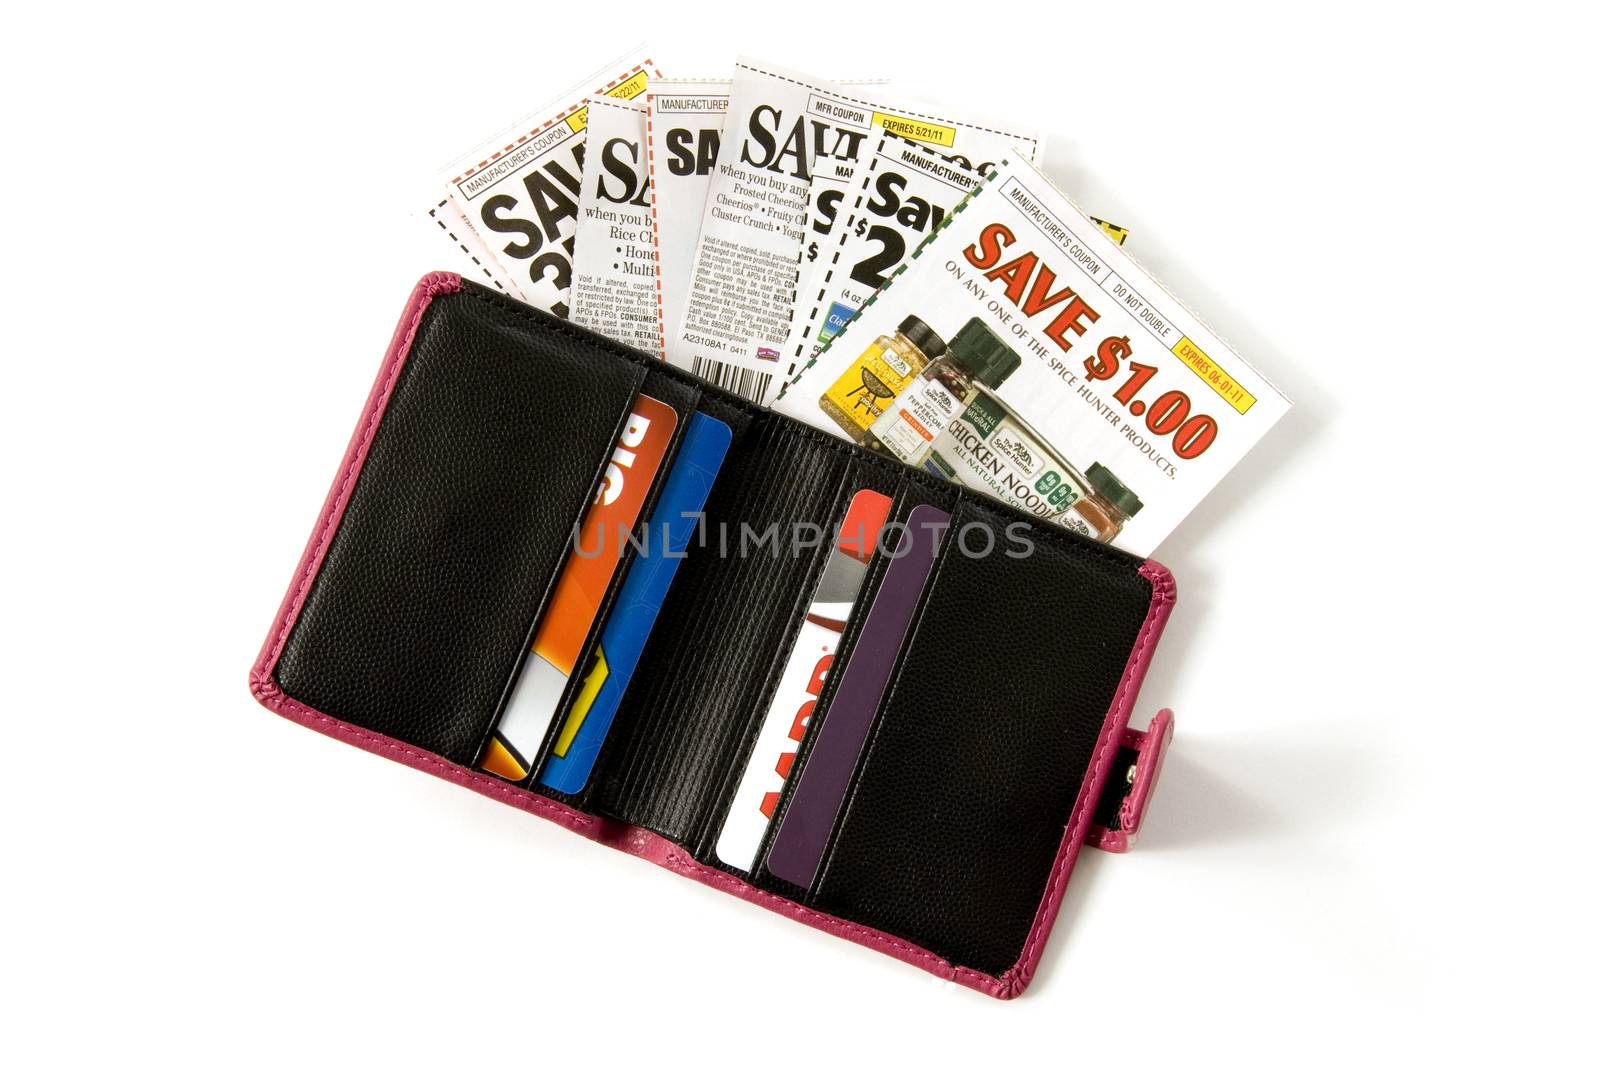 Wallet With Lots Of Coupons by stockbuster1